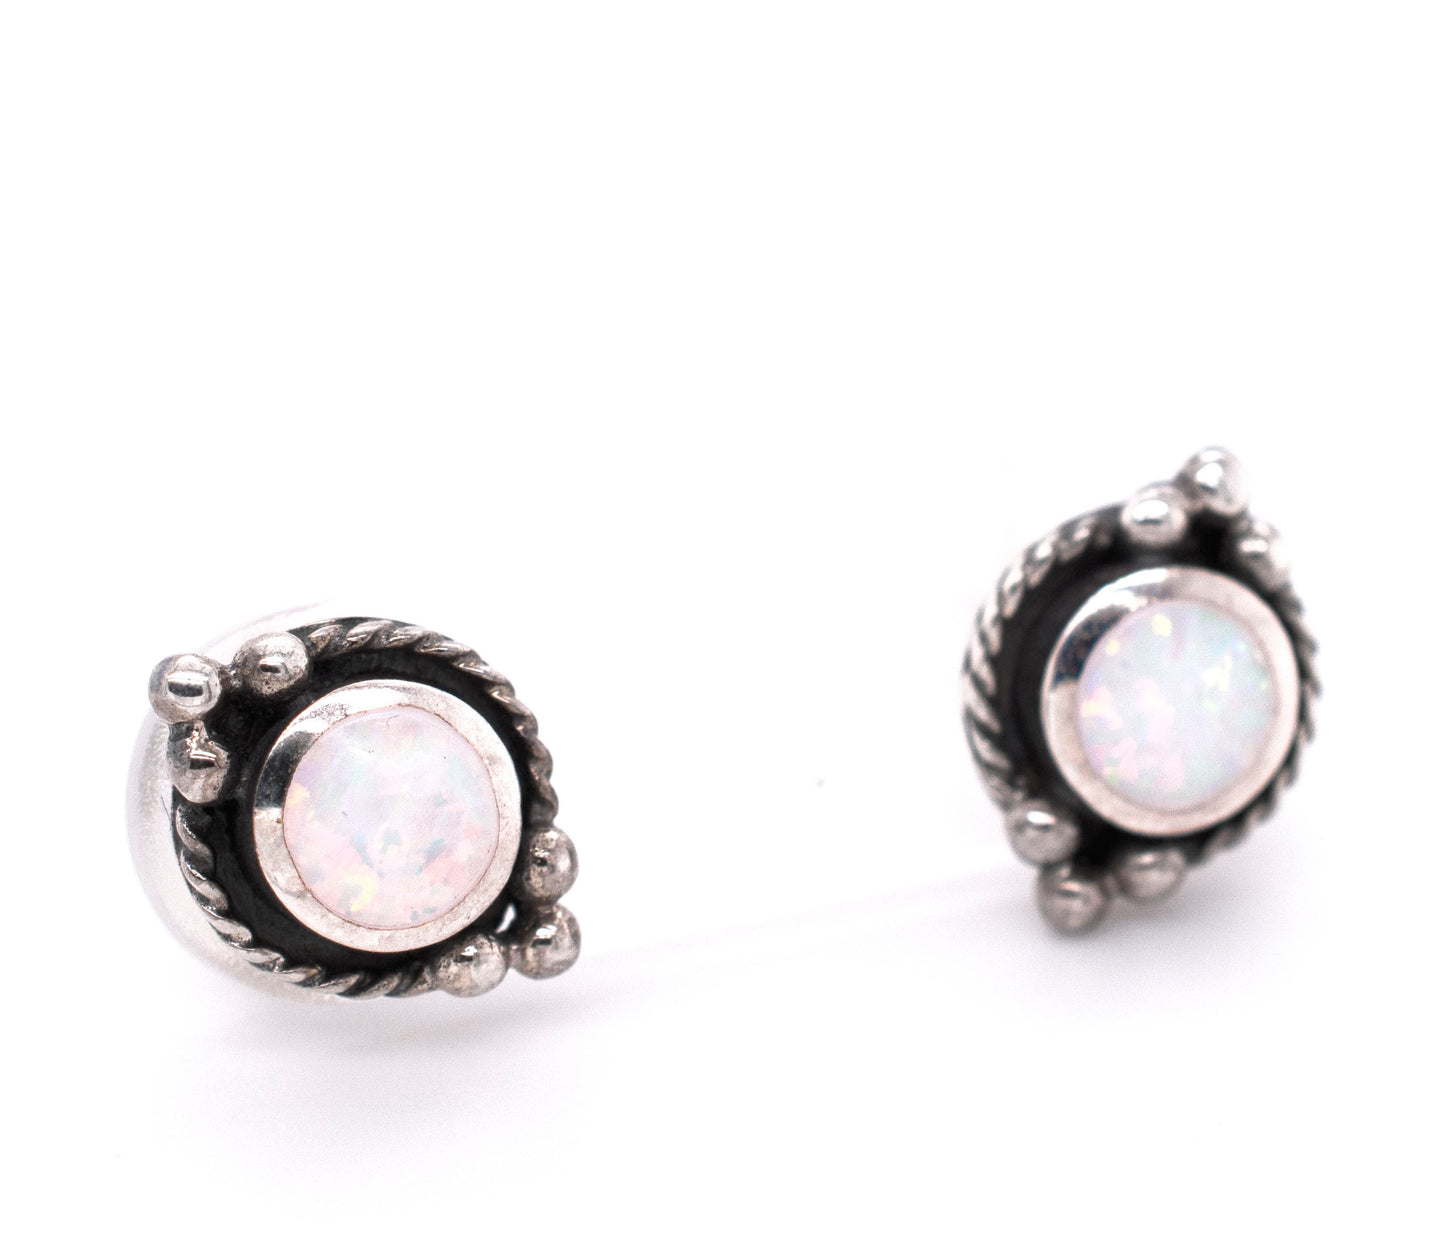 Description: Super Silver Bali style opal stud earrings featuring white opal with oxidized rope detailing, showcased on a white background.